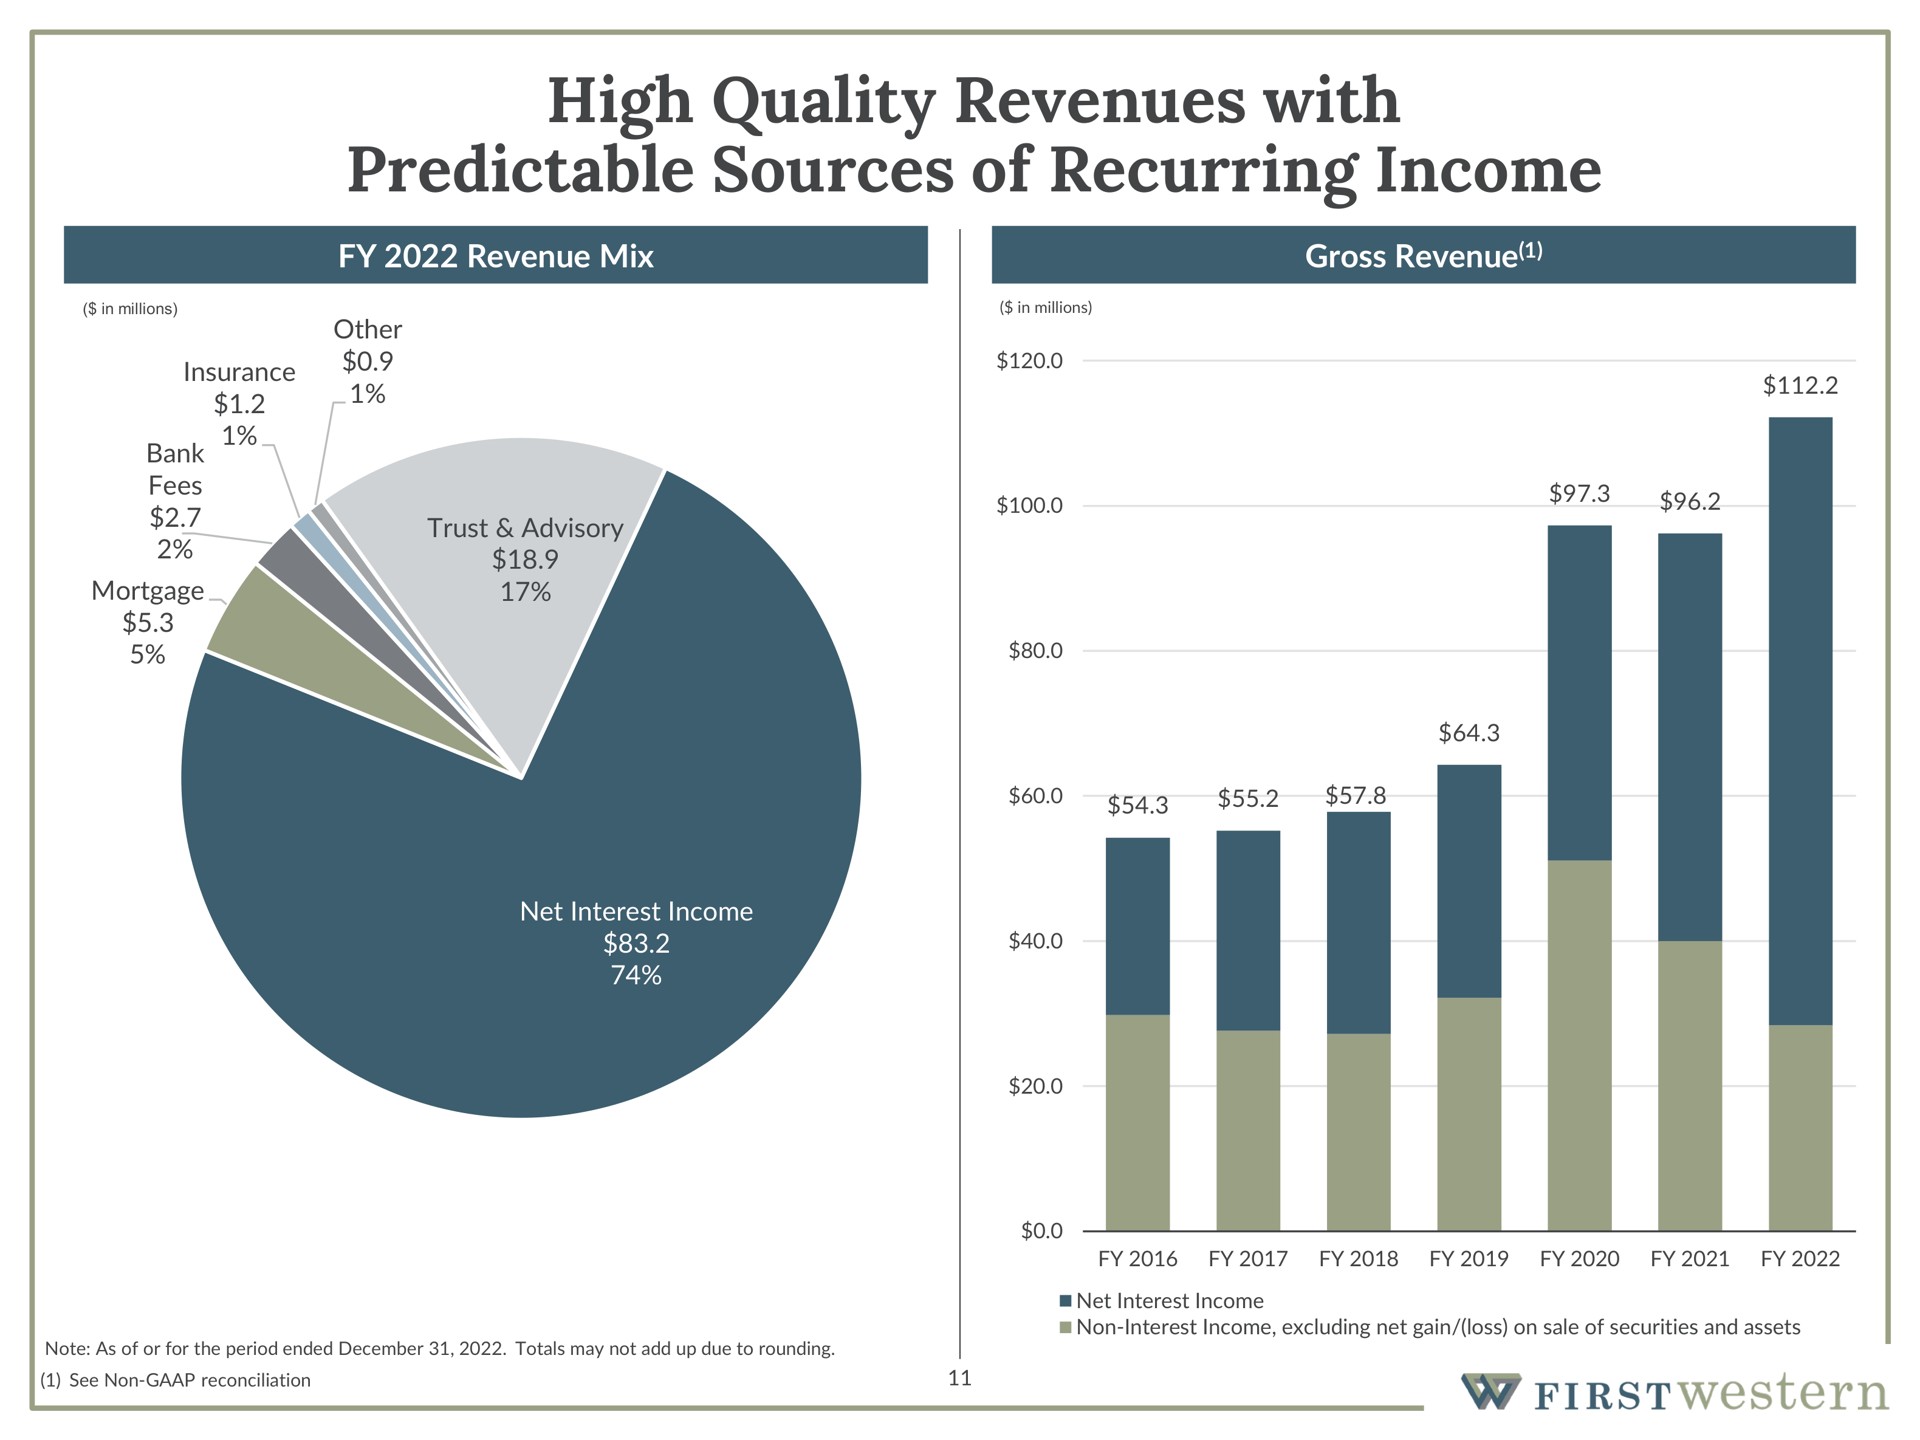 high quality revenues with predictable sources of recurring income | First Western Financial